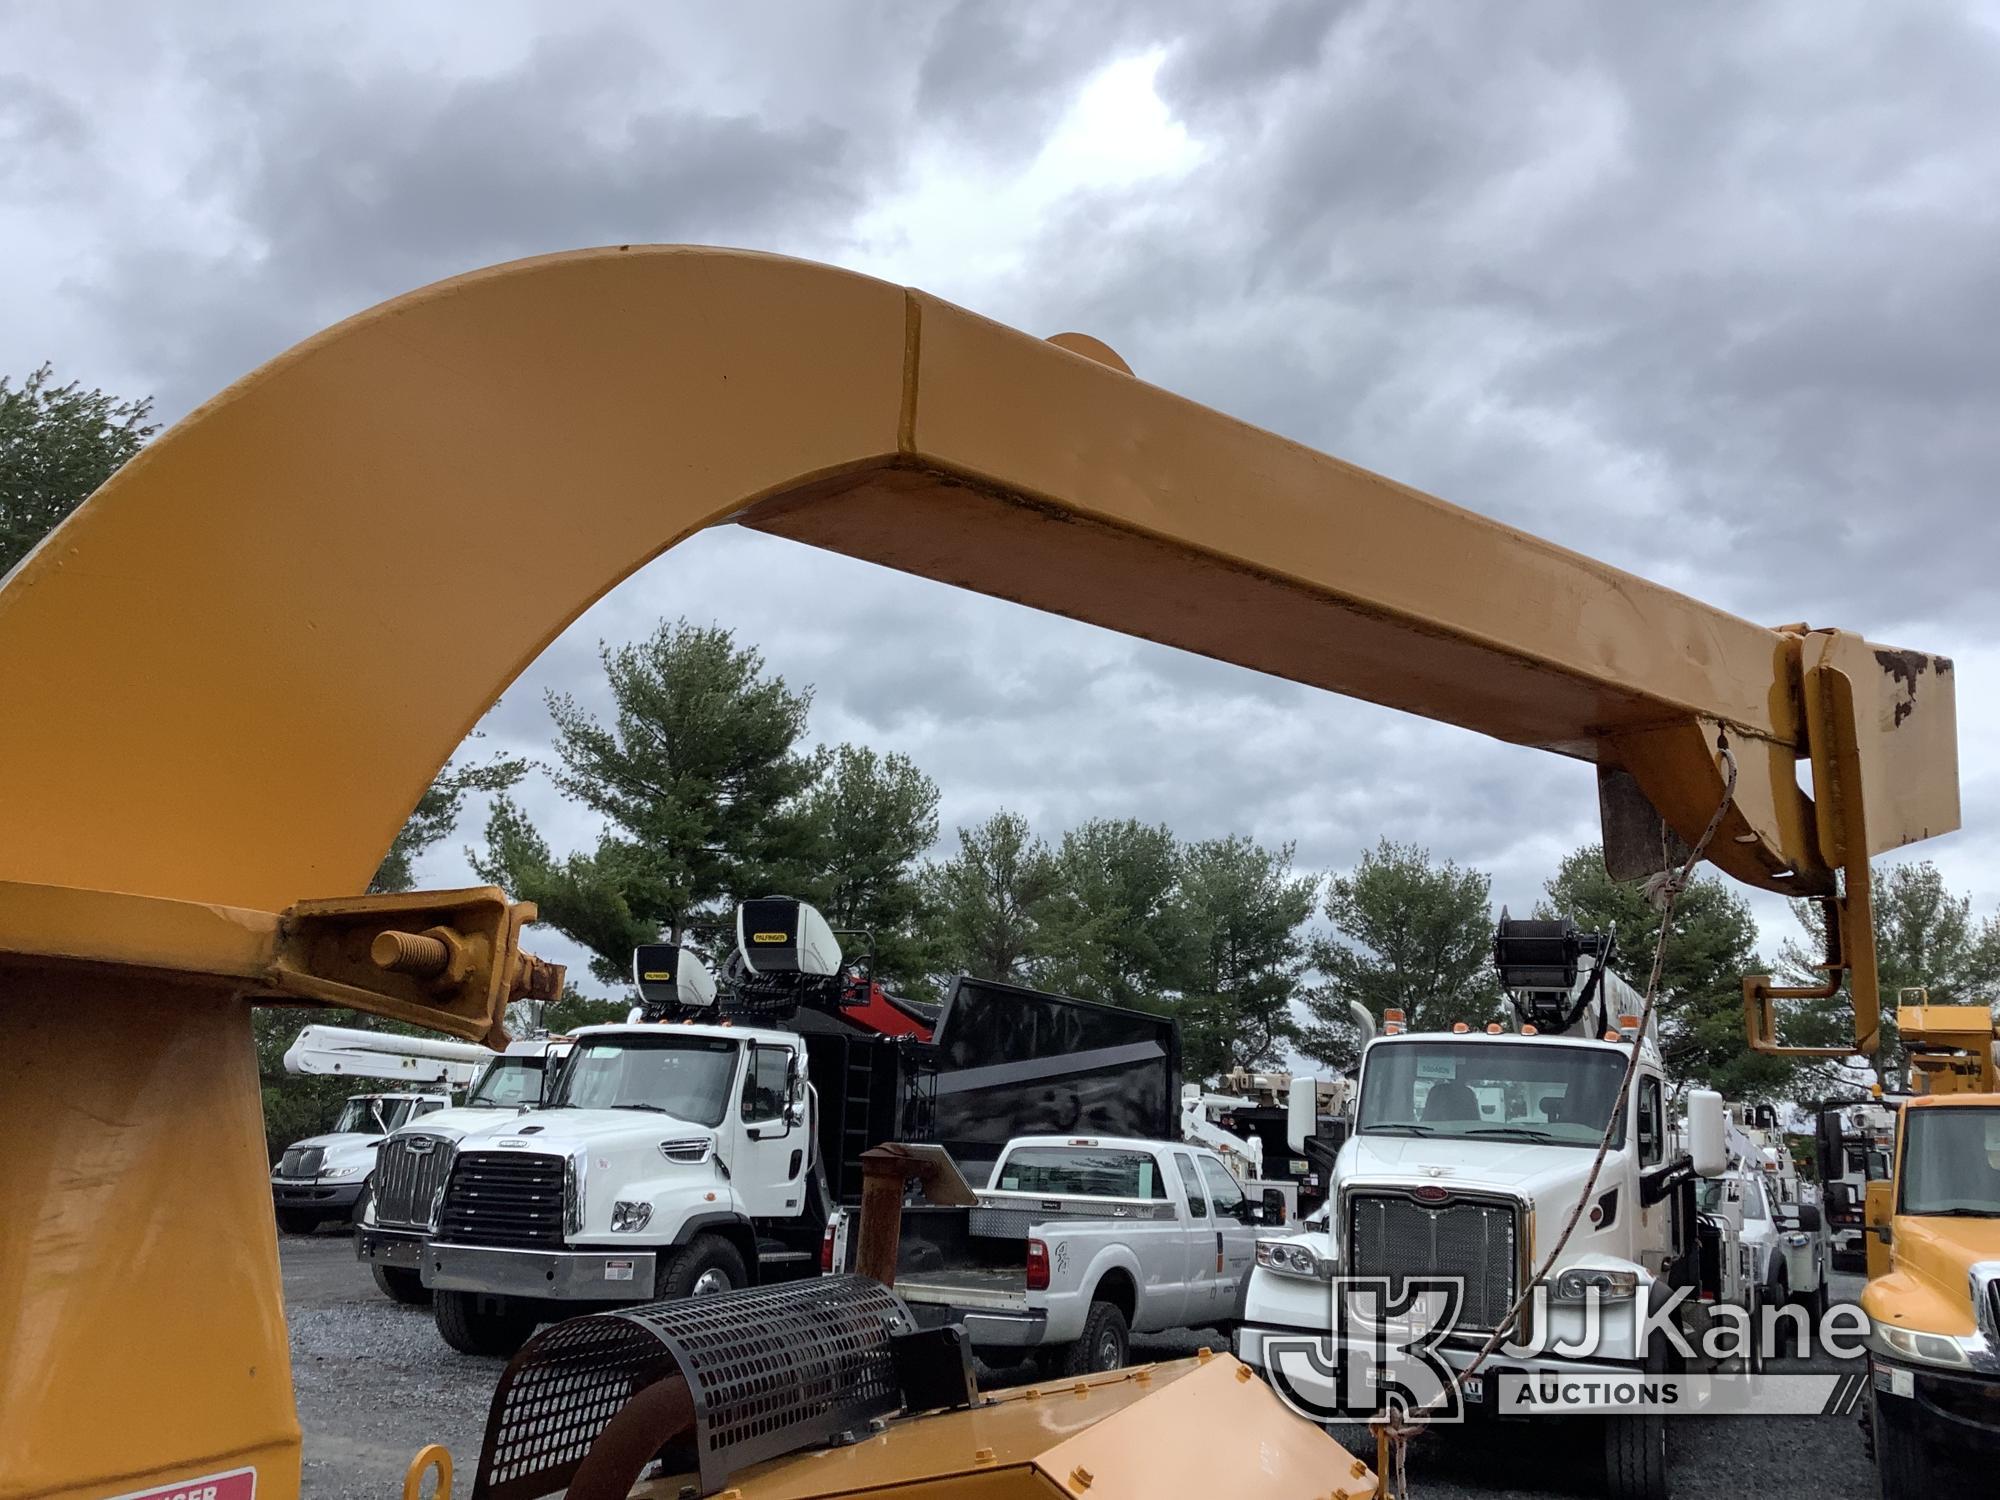 (Frederick, MD) 1994 Bandit 200 Portable Chipper (12in Disc) Runs, Operational Condition Unknown, Ru